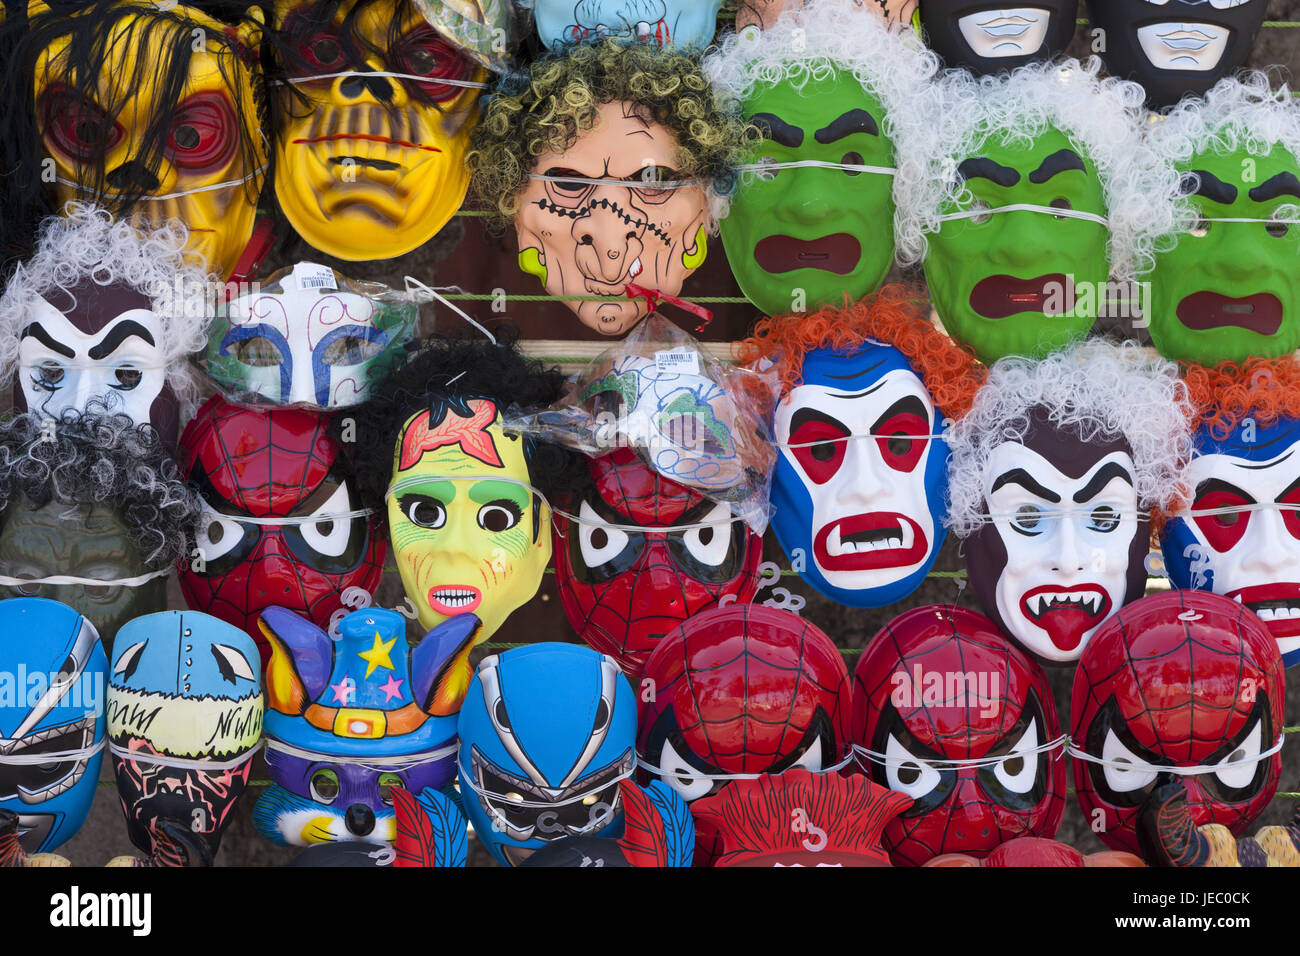 Masks at the carnival in Puerto Plata, the Dominican Republic, Stock Photo